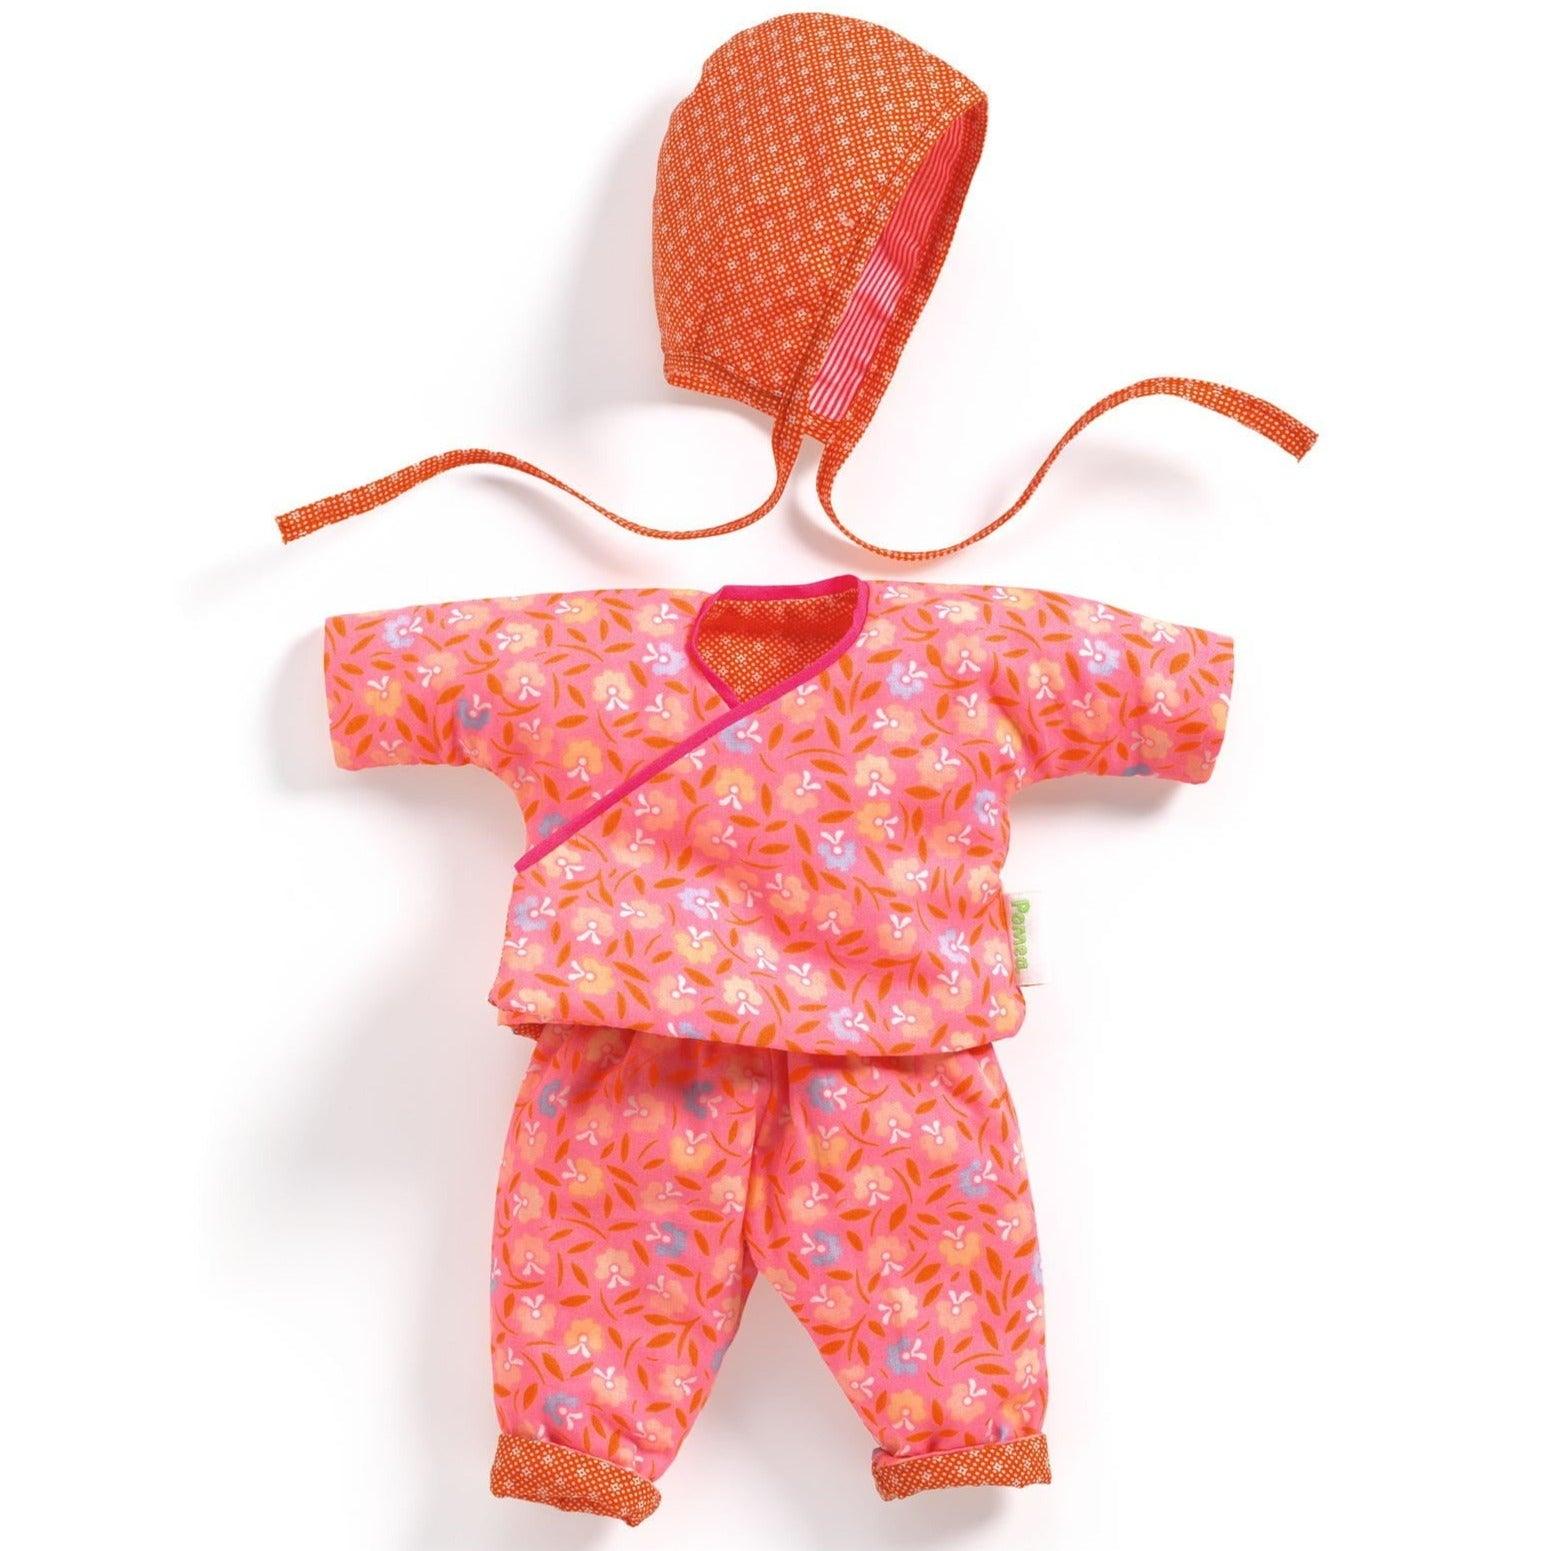 Pomea: pink clothes for Petit Pan doll